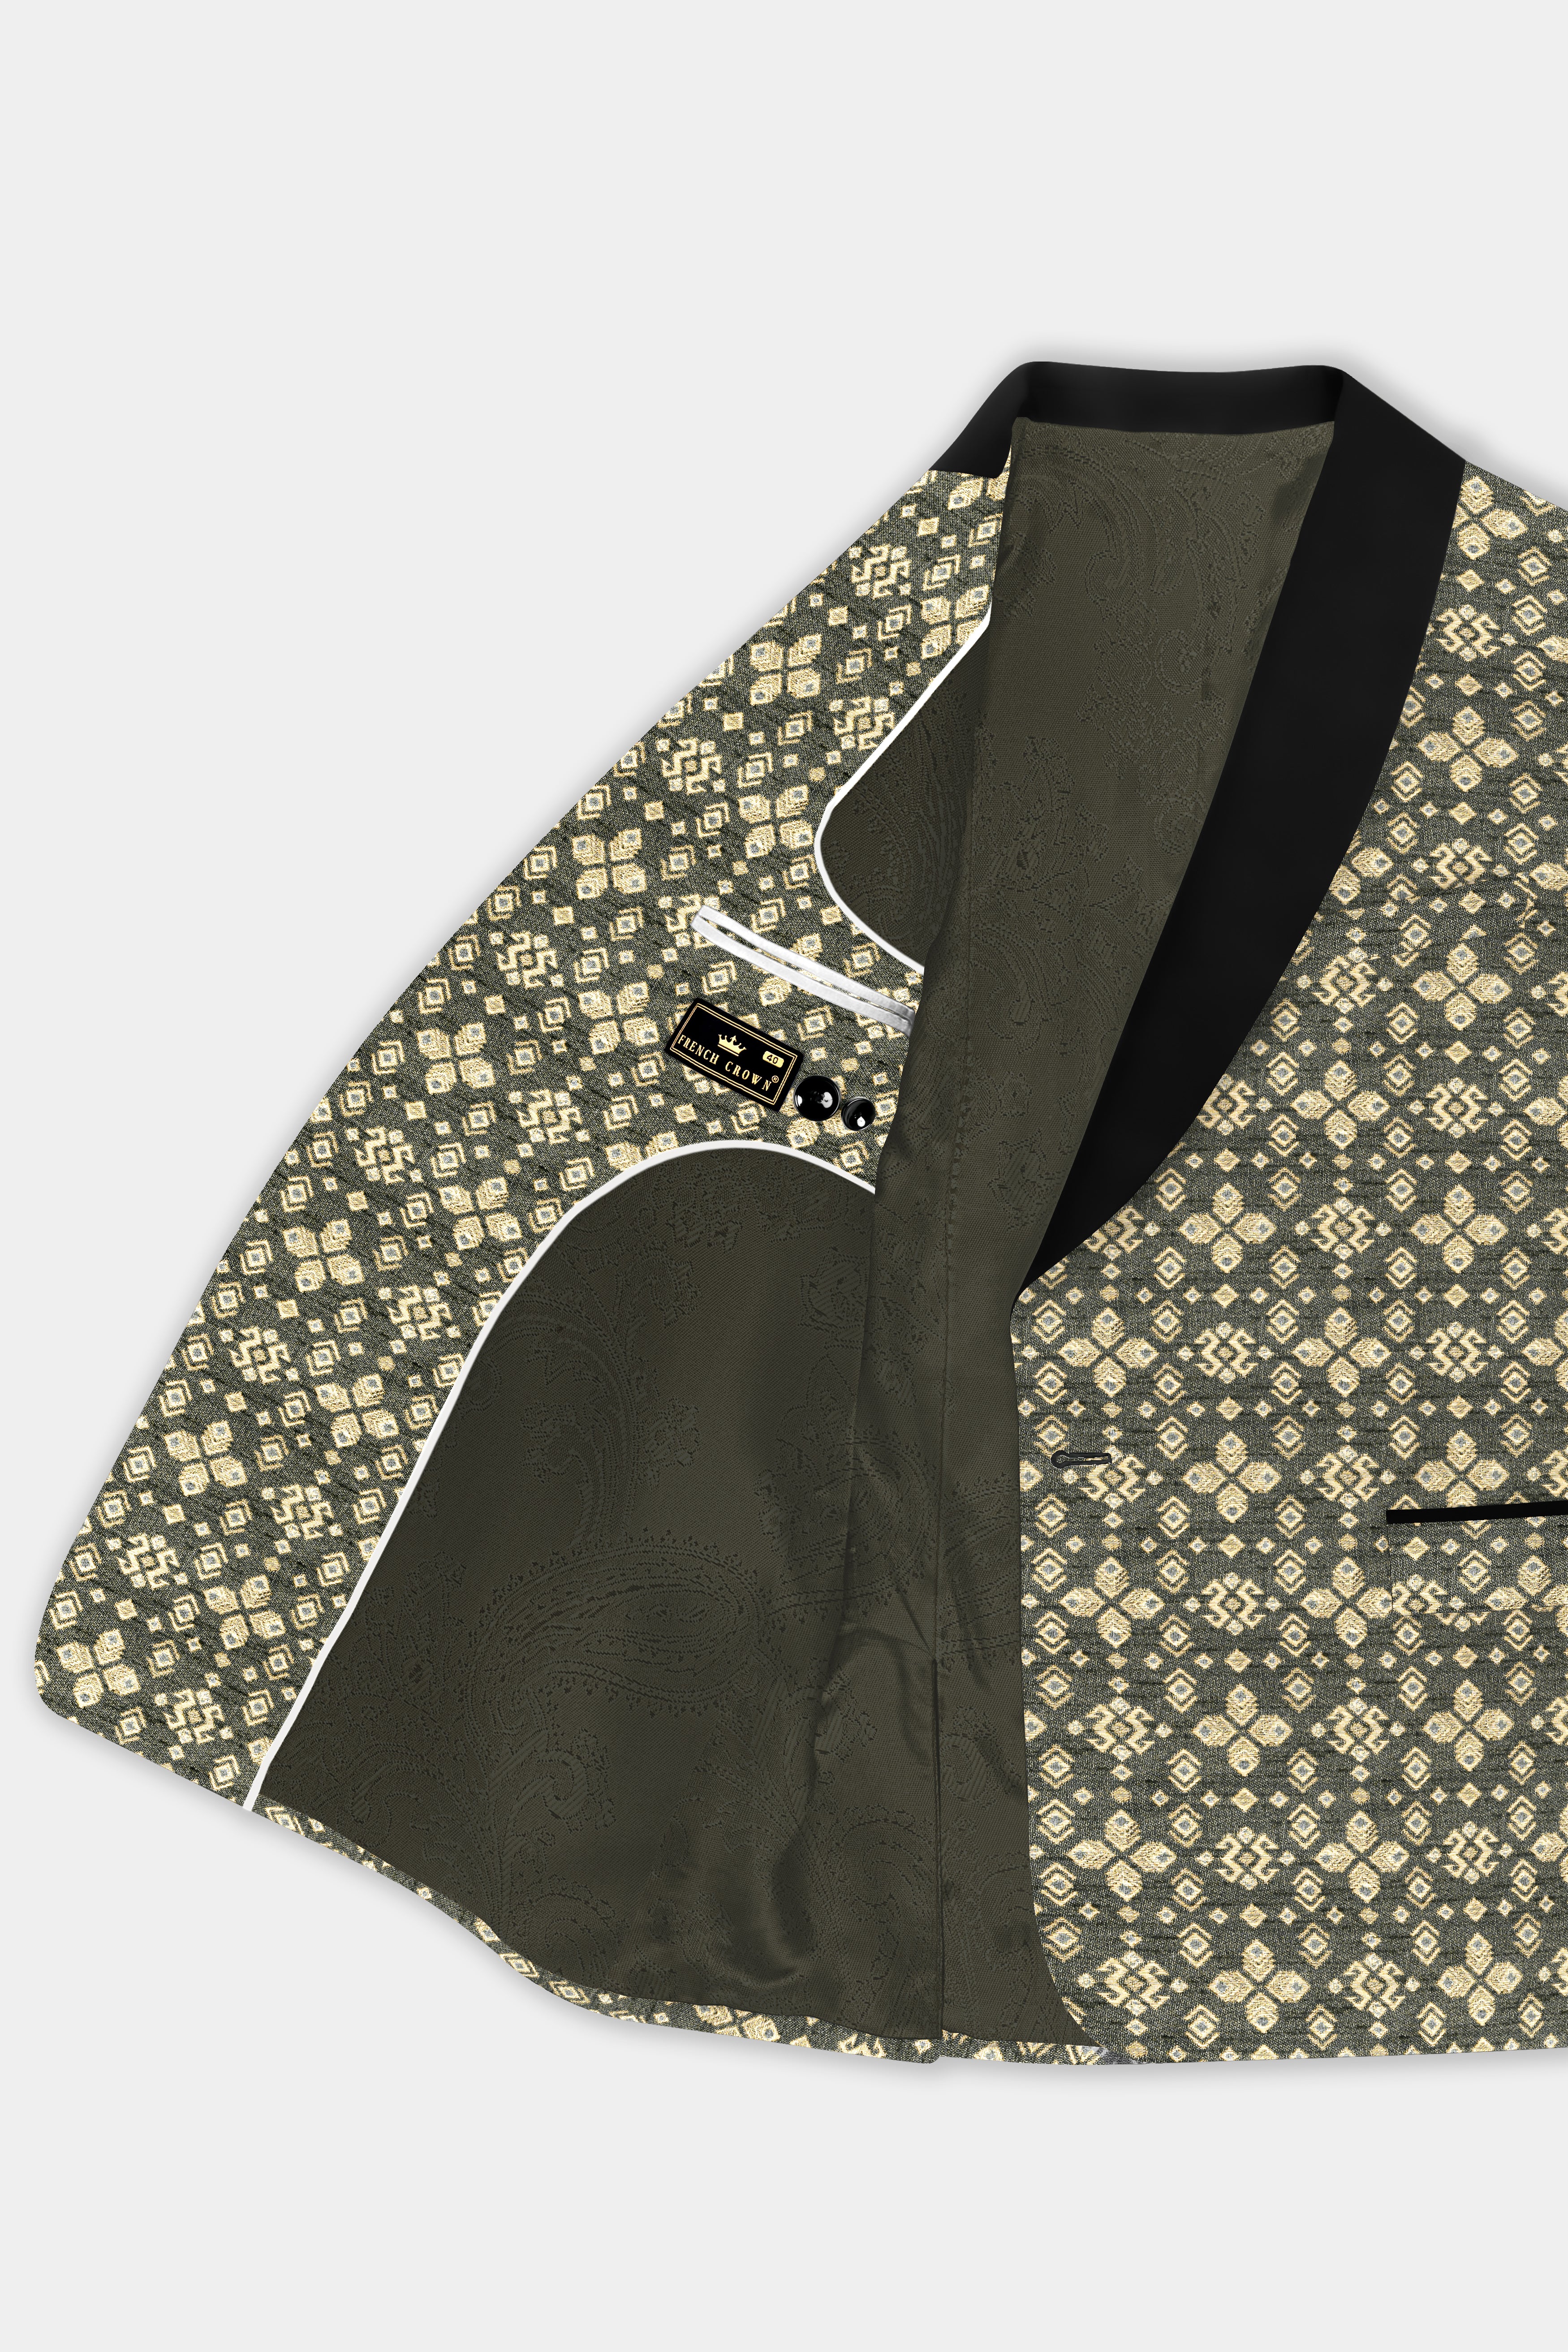 Kelp Green and Fawn Brown Jacquard Weave Tuxedo Blazer BL3701-BKL-36, BL3701-BKL-38, BL3701-BKL-40, BL3701-BKL-42, BL3701-BKL-44, BL3701-BKL-46, BL3701-BKL-48, BL3701-BKL-50, BL3701-BKL-52, BL3701-BKL-54, BL3701-BKL-56, BL3701-BKL-58, BL3701-BKL-60